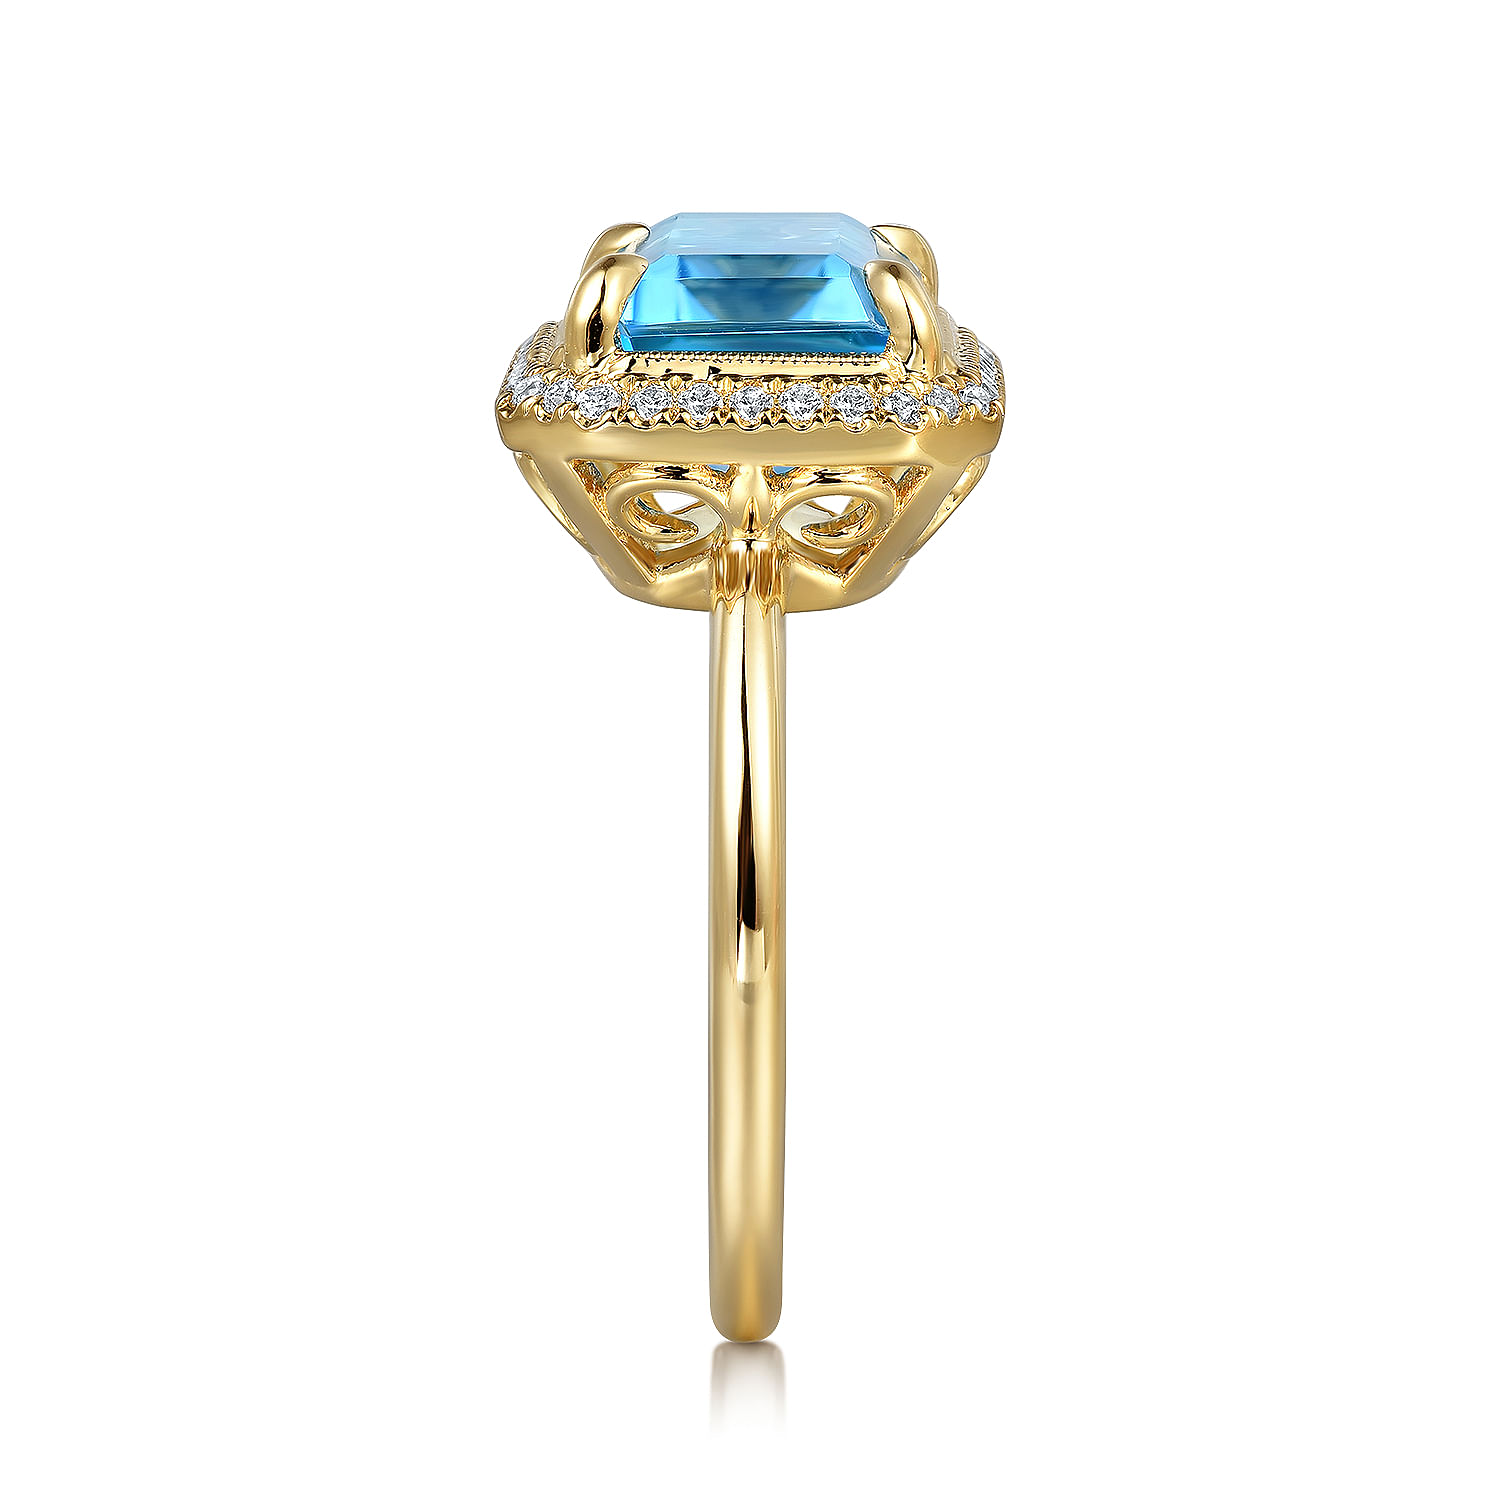 14K Yellow Gold Diamond and Blue Topaz Emerald Cut Ladies Ring With Flower Pattern Gallery